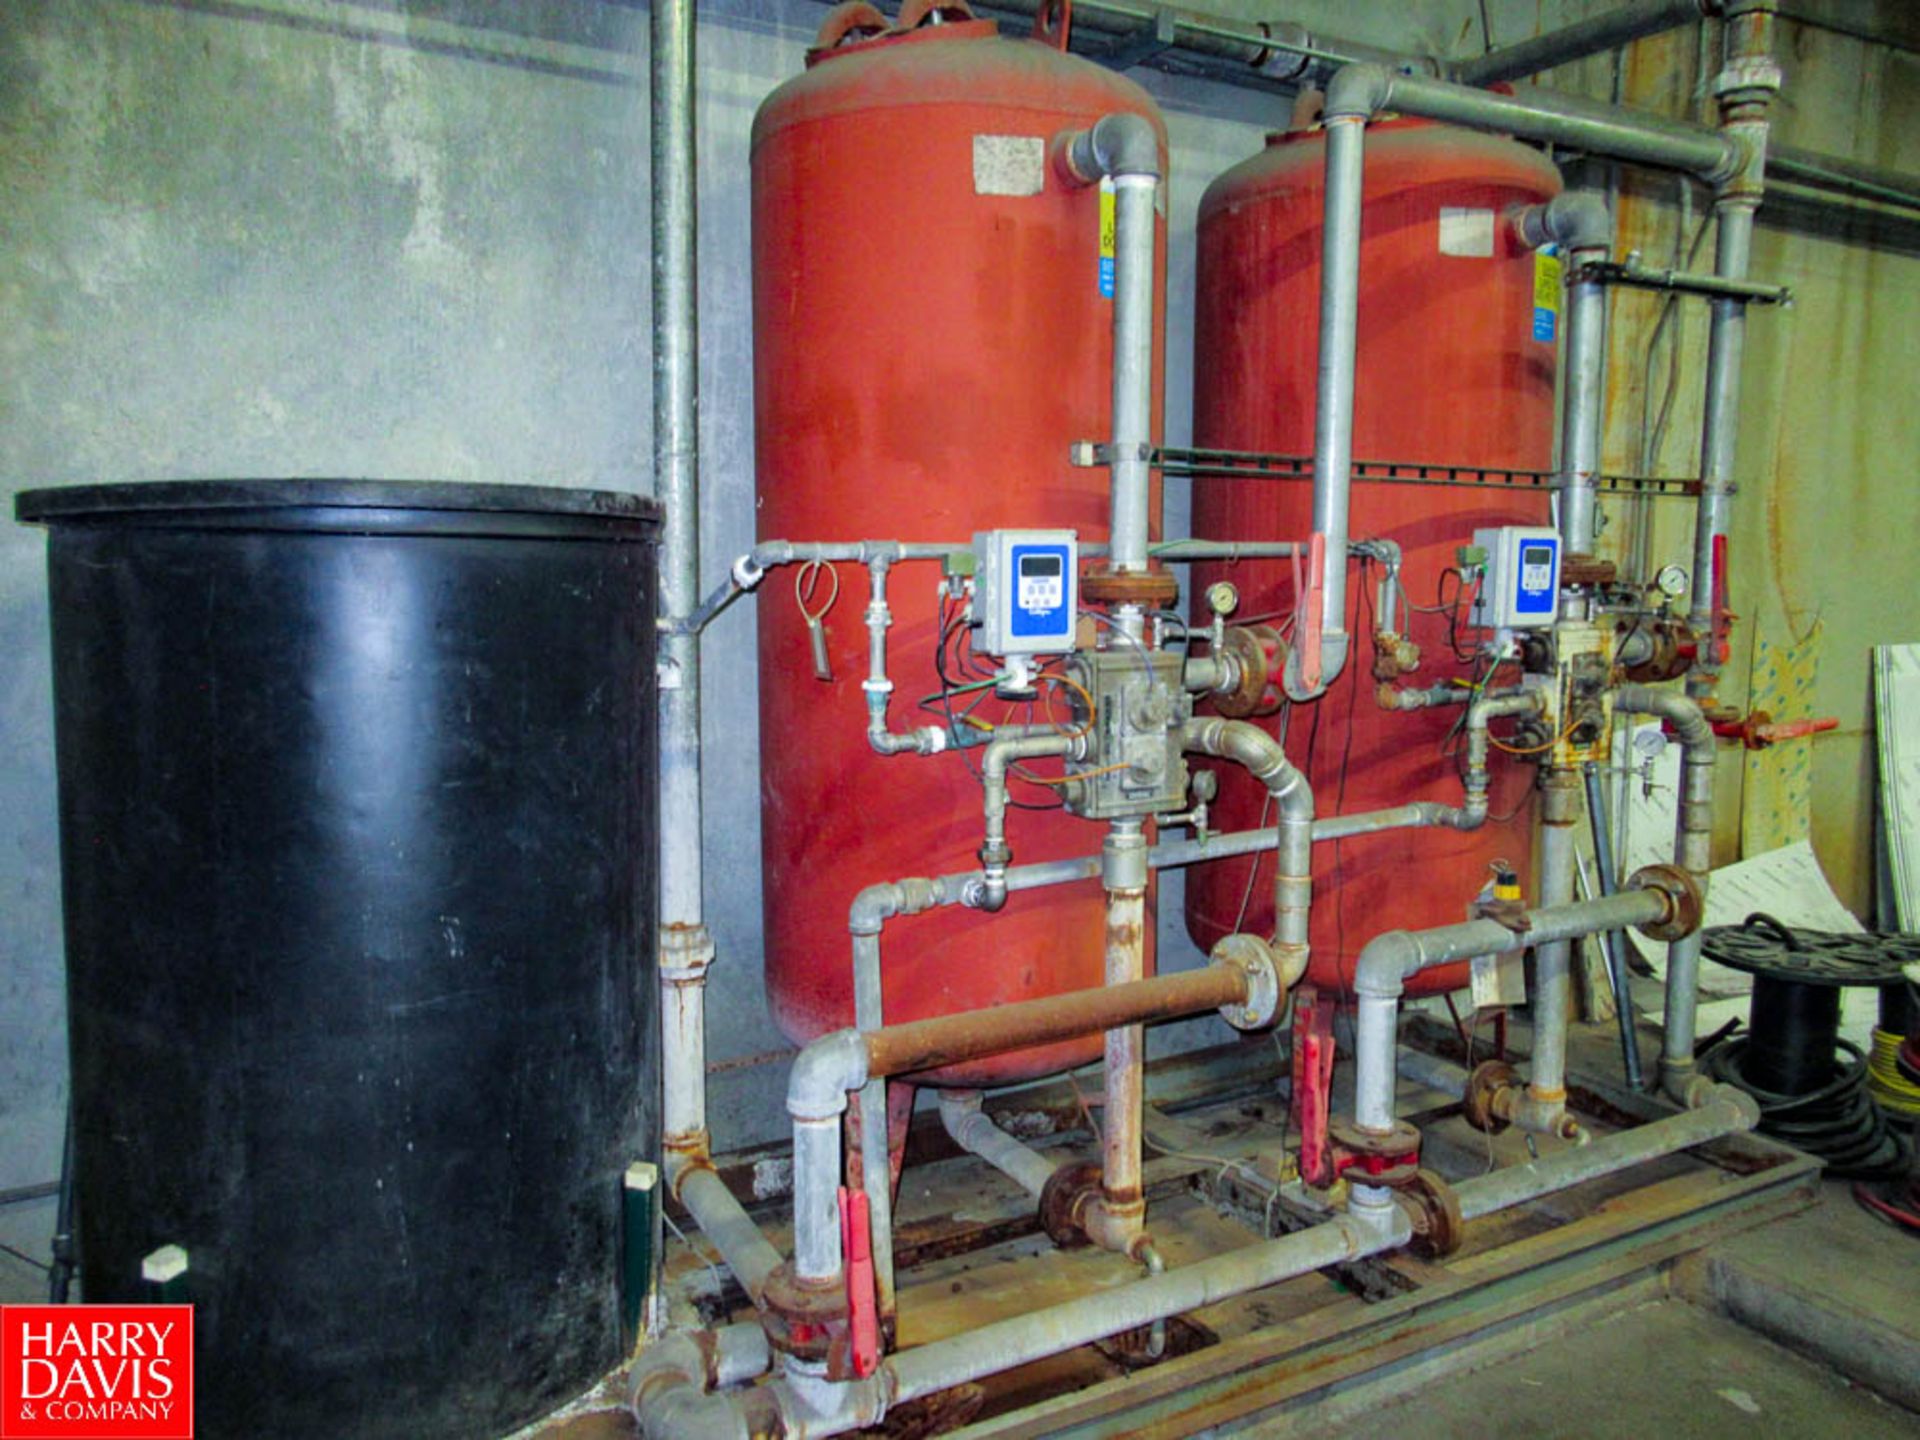 Boiler Soft Water System Consist Of (2) Vertical Receivers with Controls, Located In: Boiler - Image 2 of 2